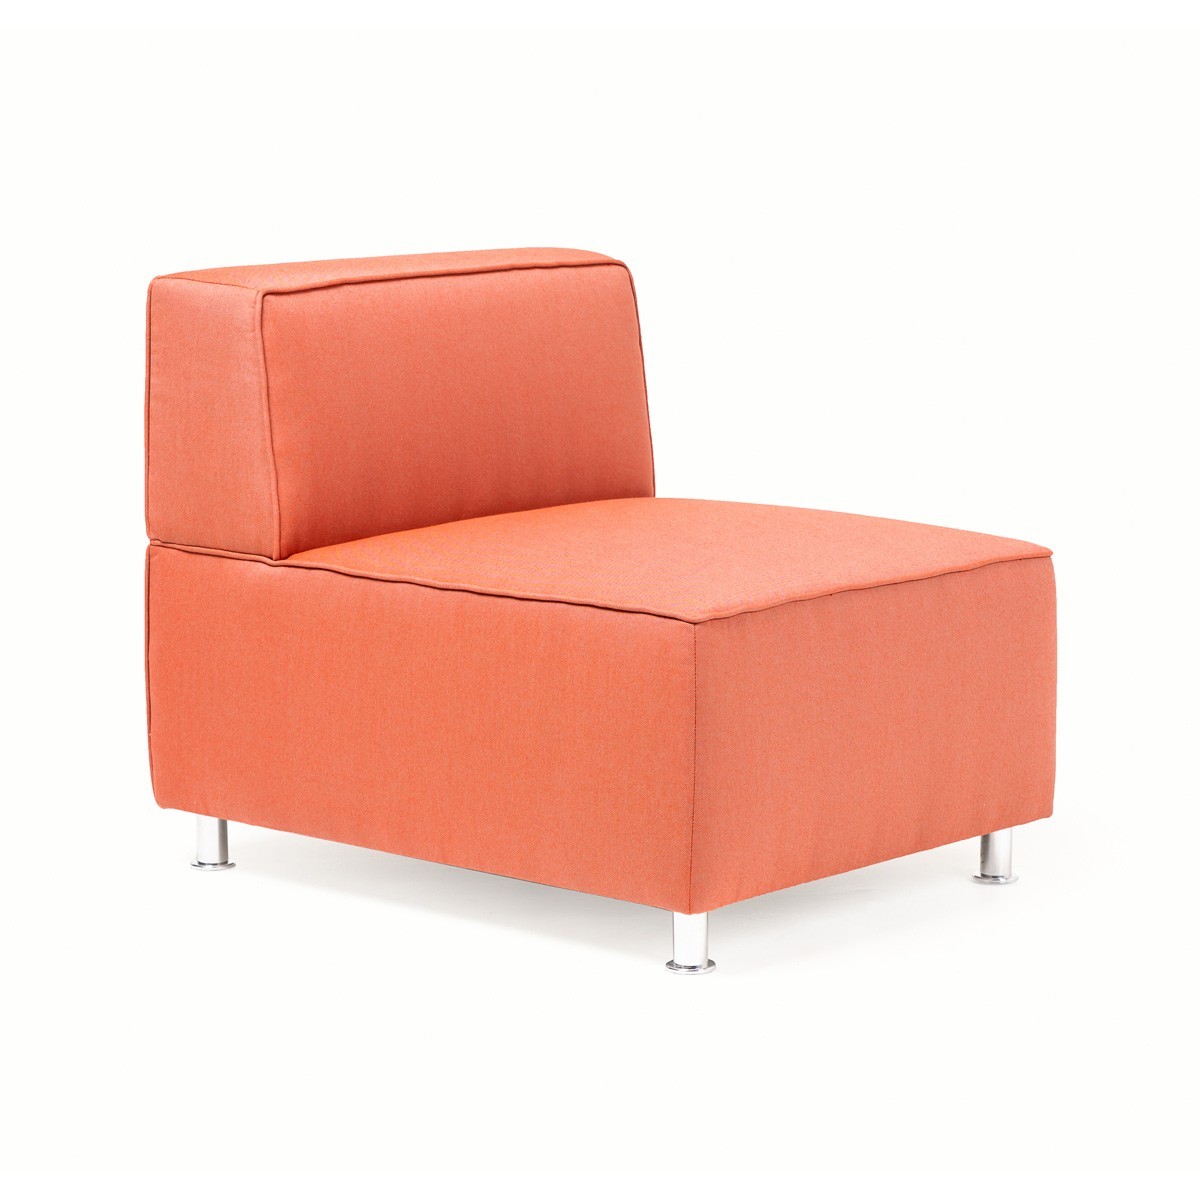 Tosca - 1 seater element